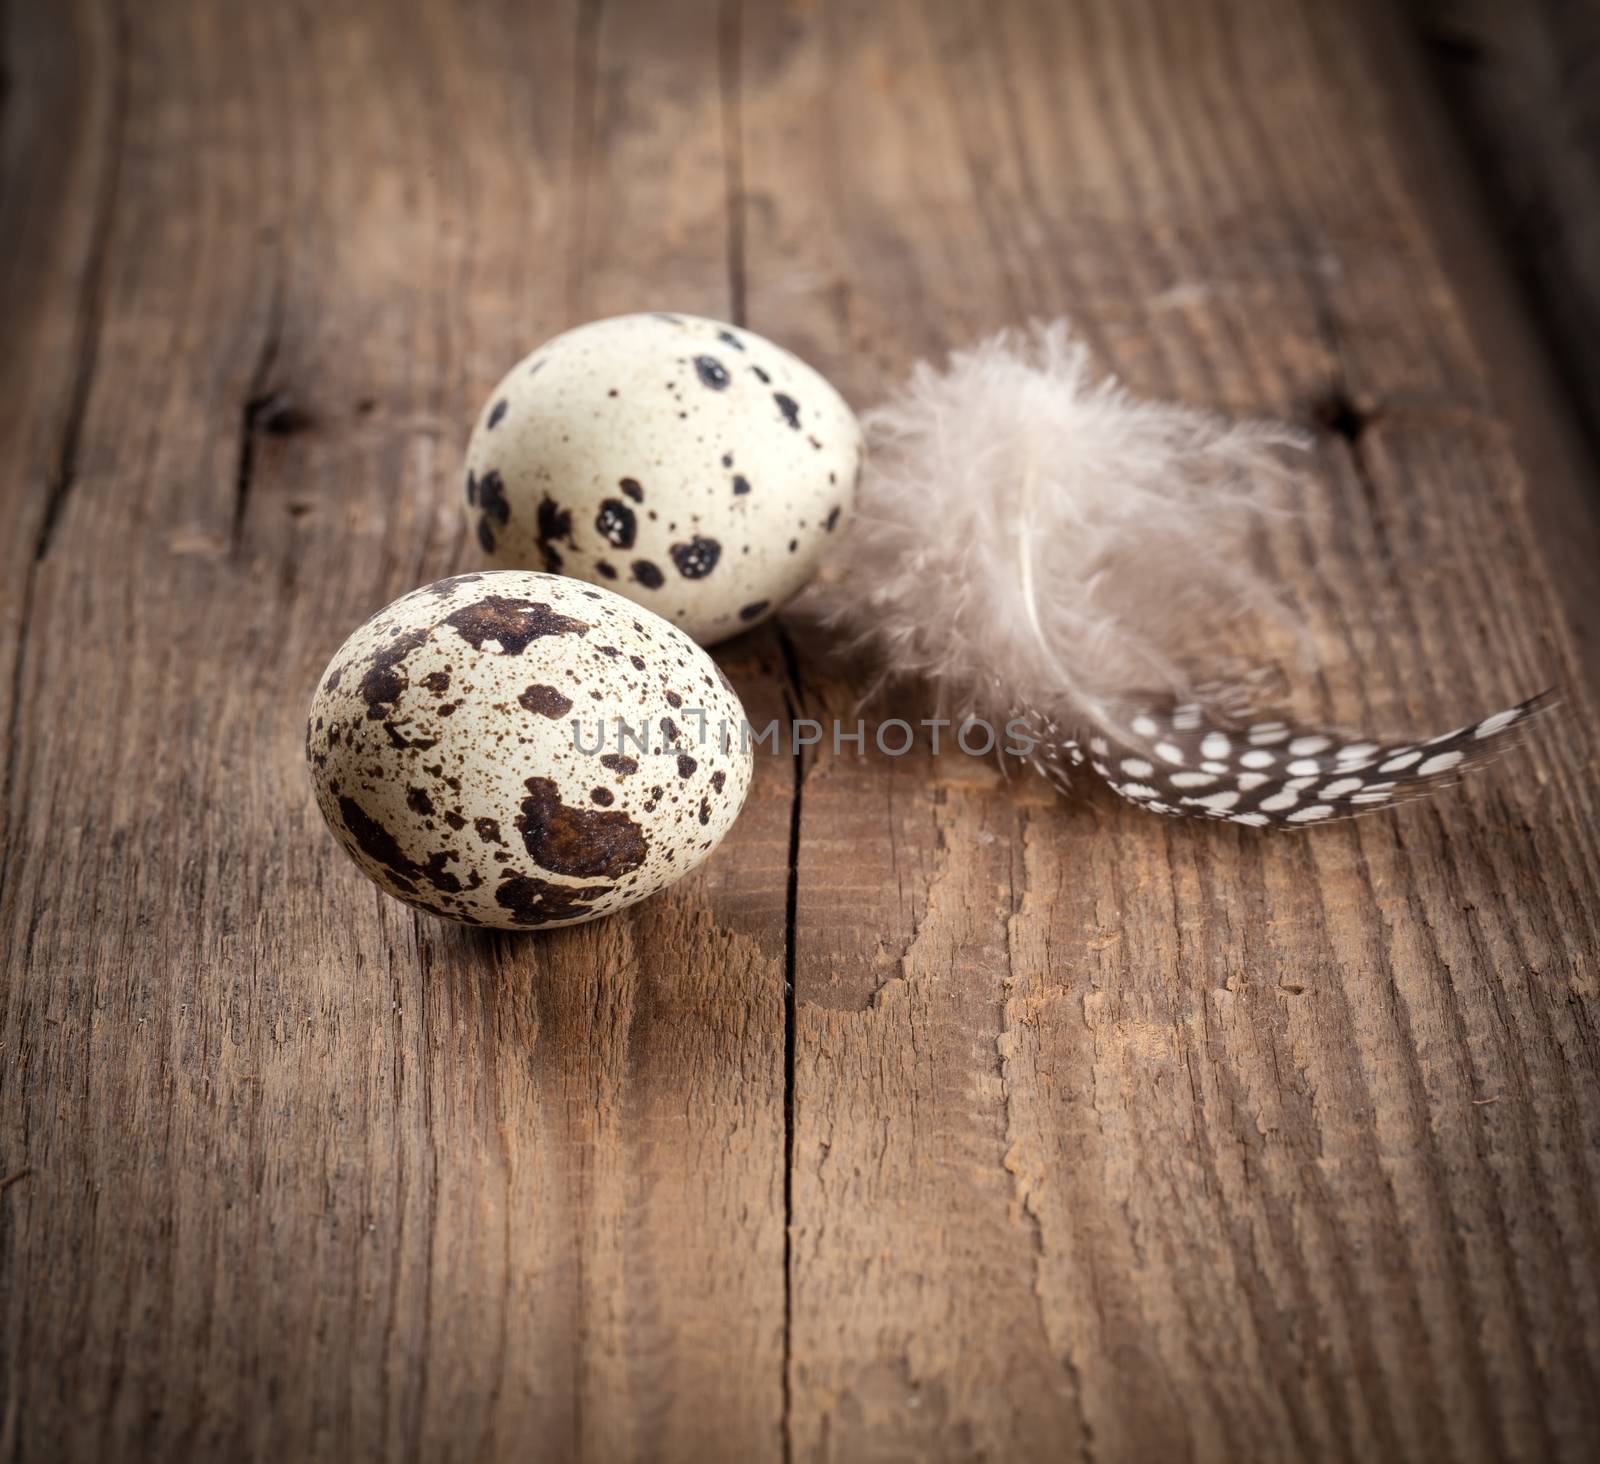 quail eggs with feather on wooden background by motorolka